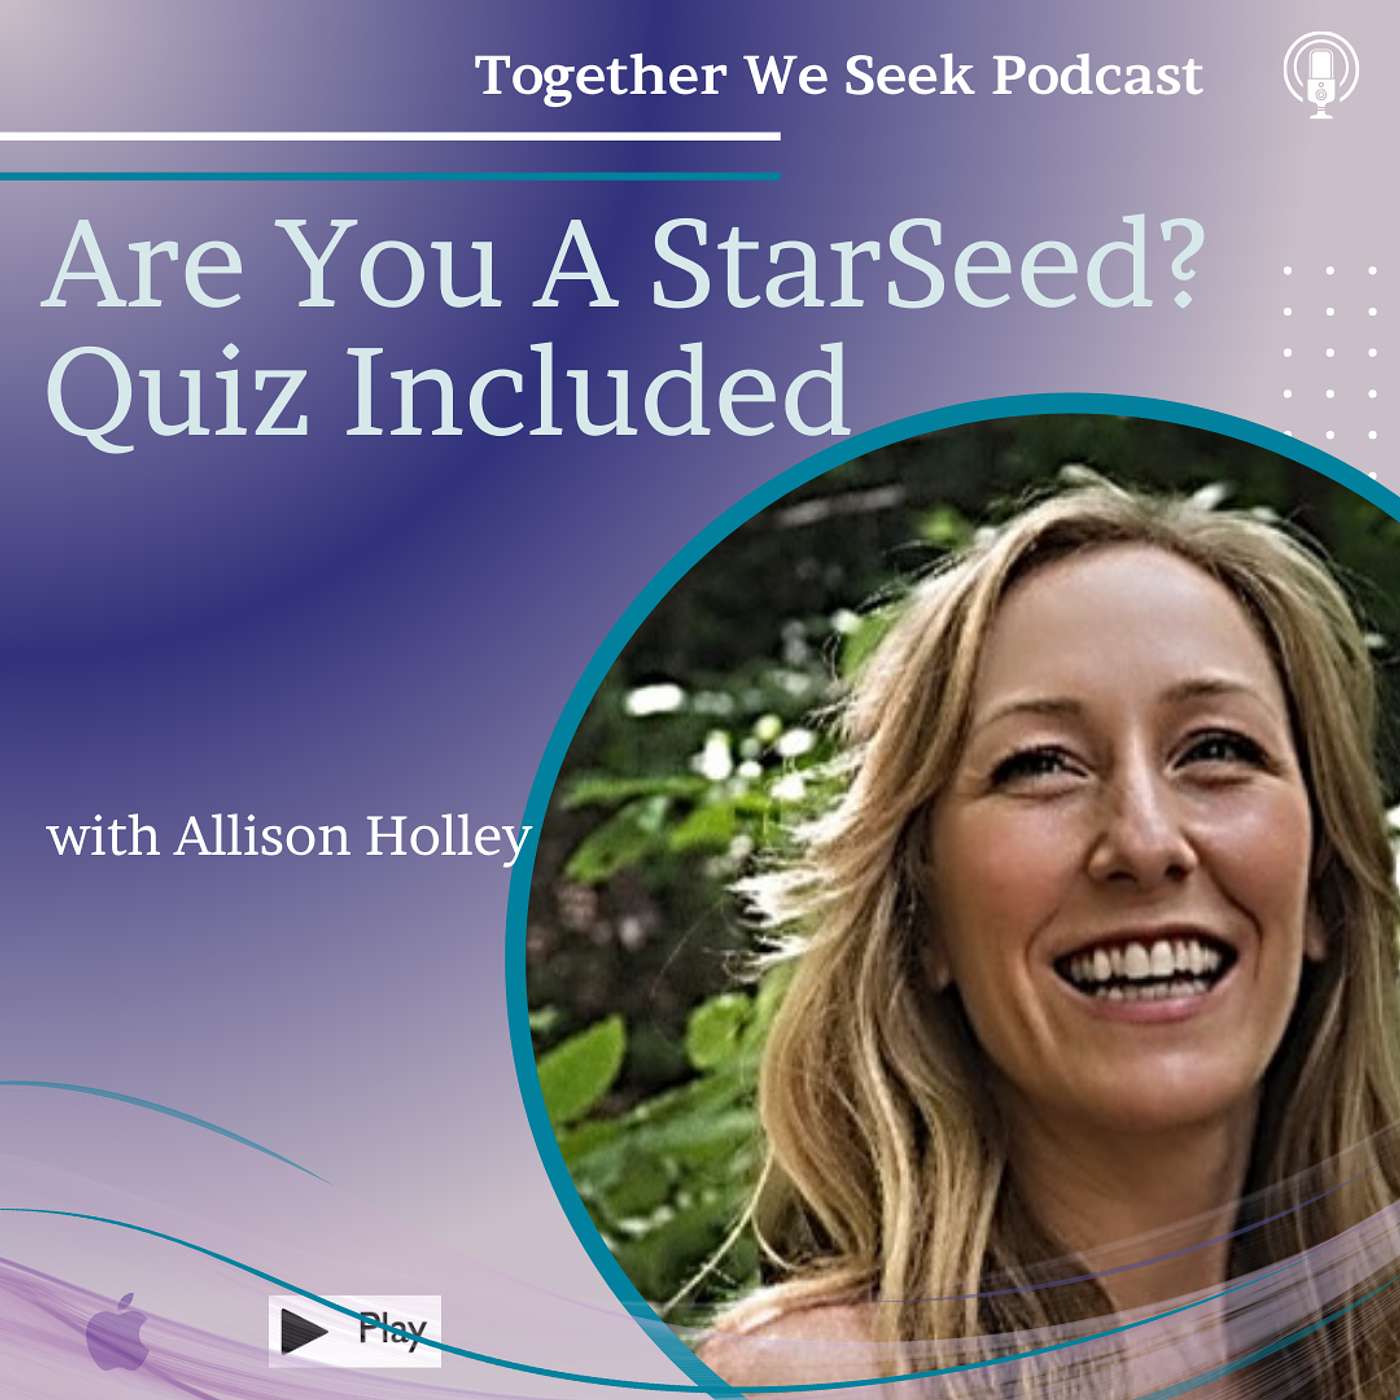 Are You A Starseed? Quiz & Meetup with Allison Holley